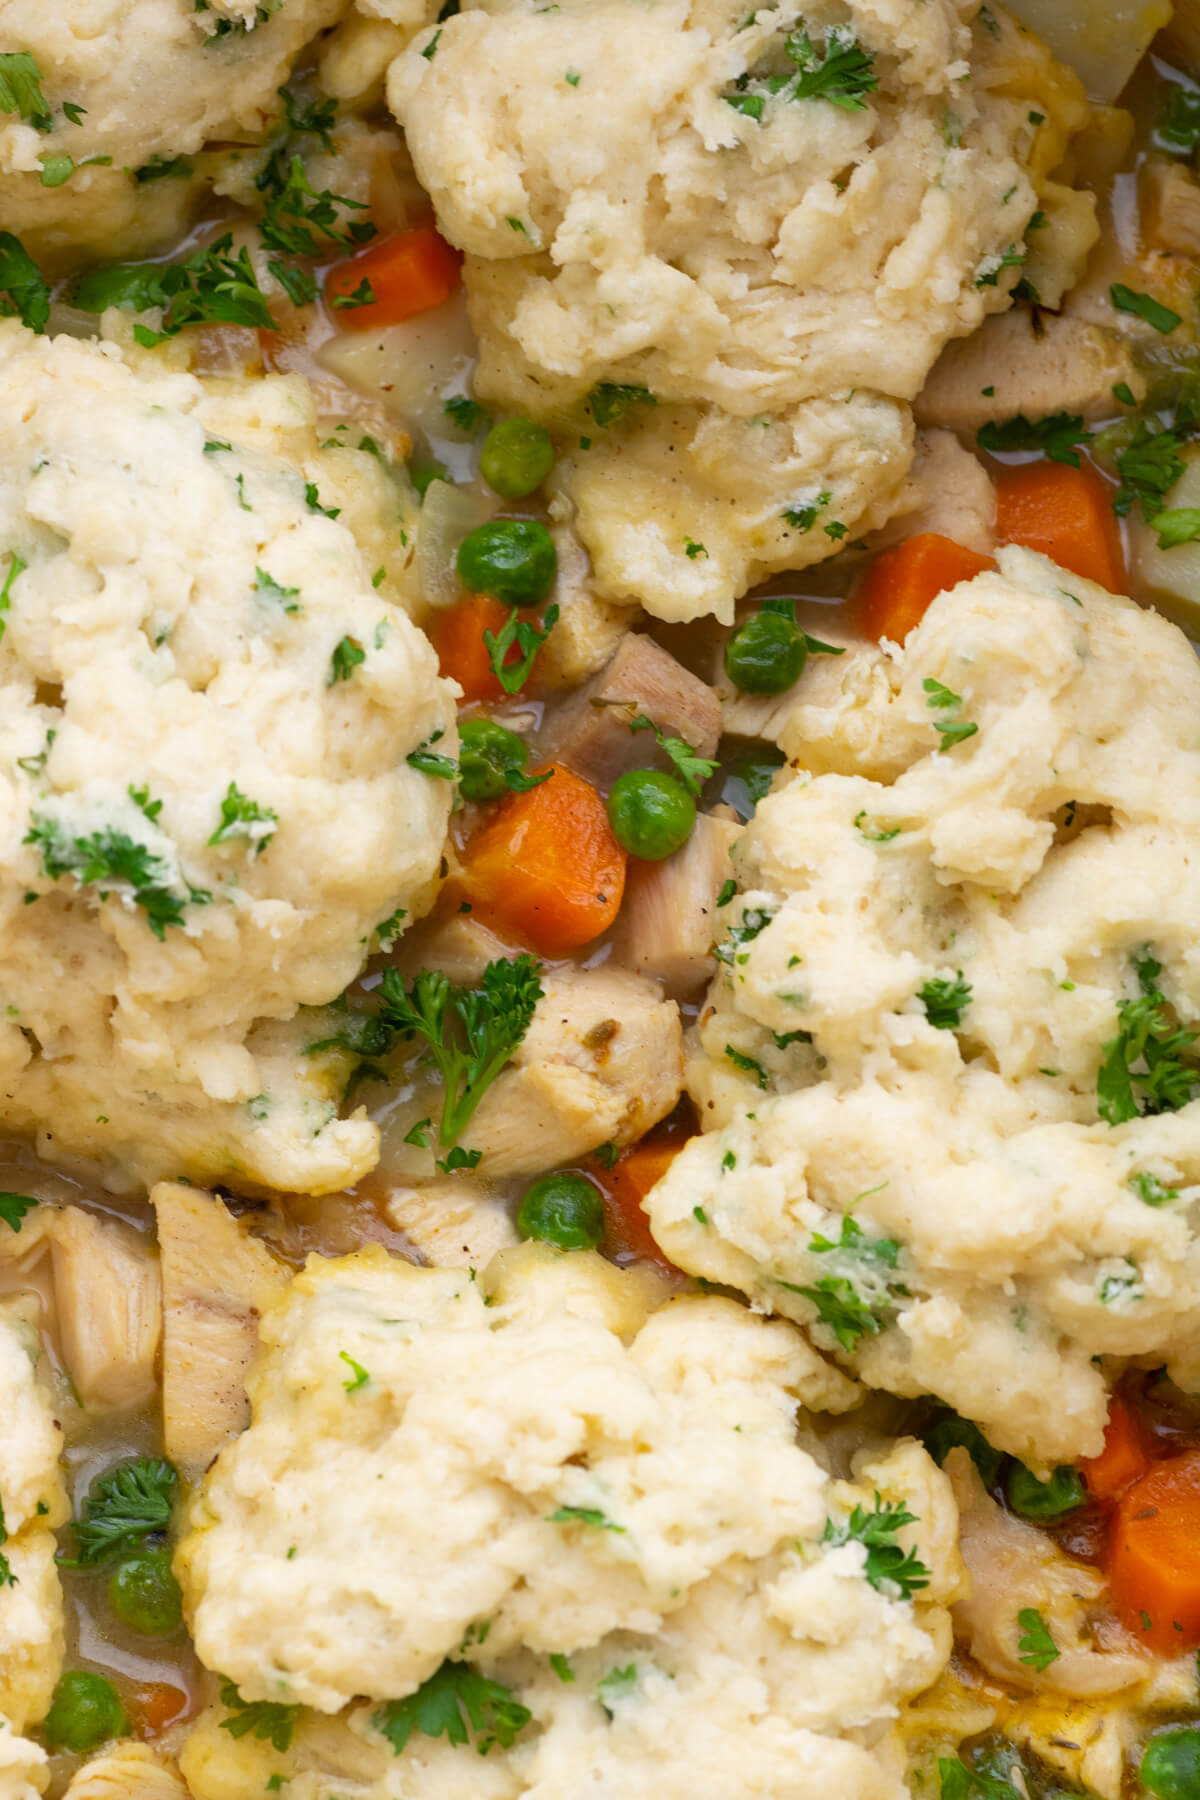 Close up of fluffy flour dumplings in a large pot of chicken stew.